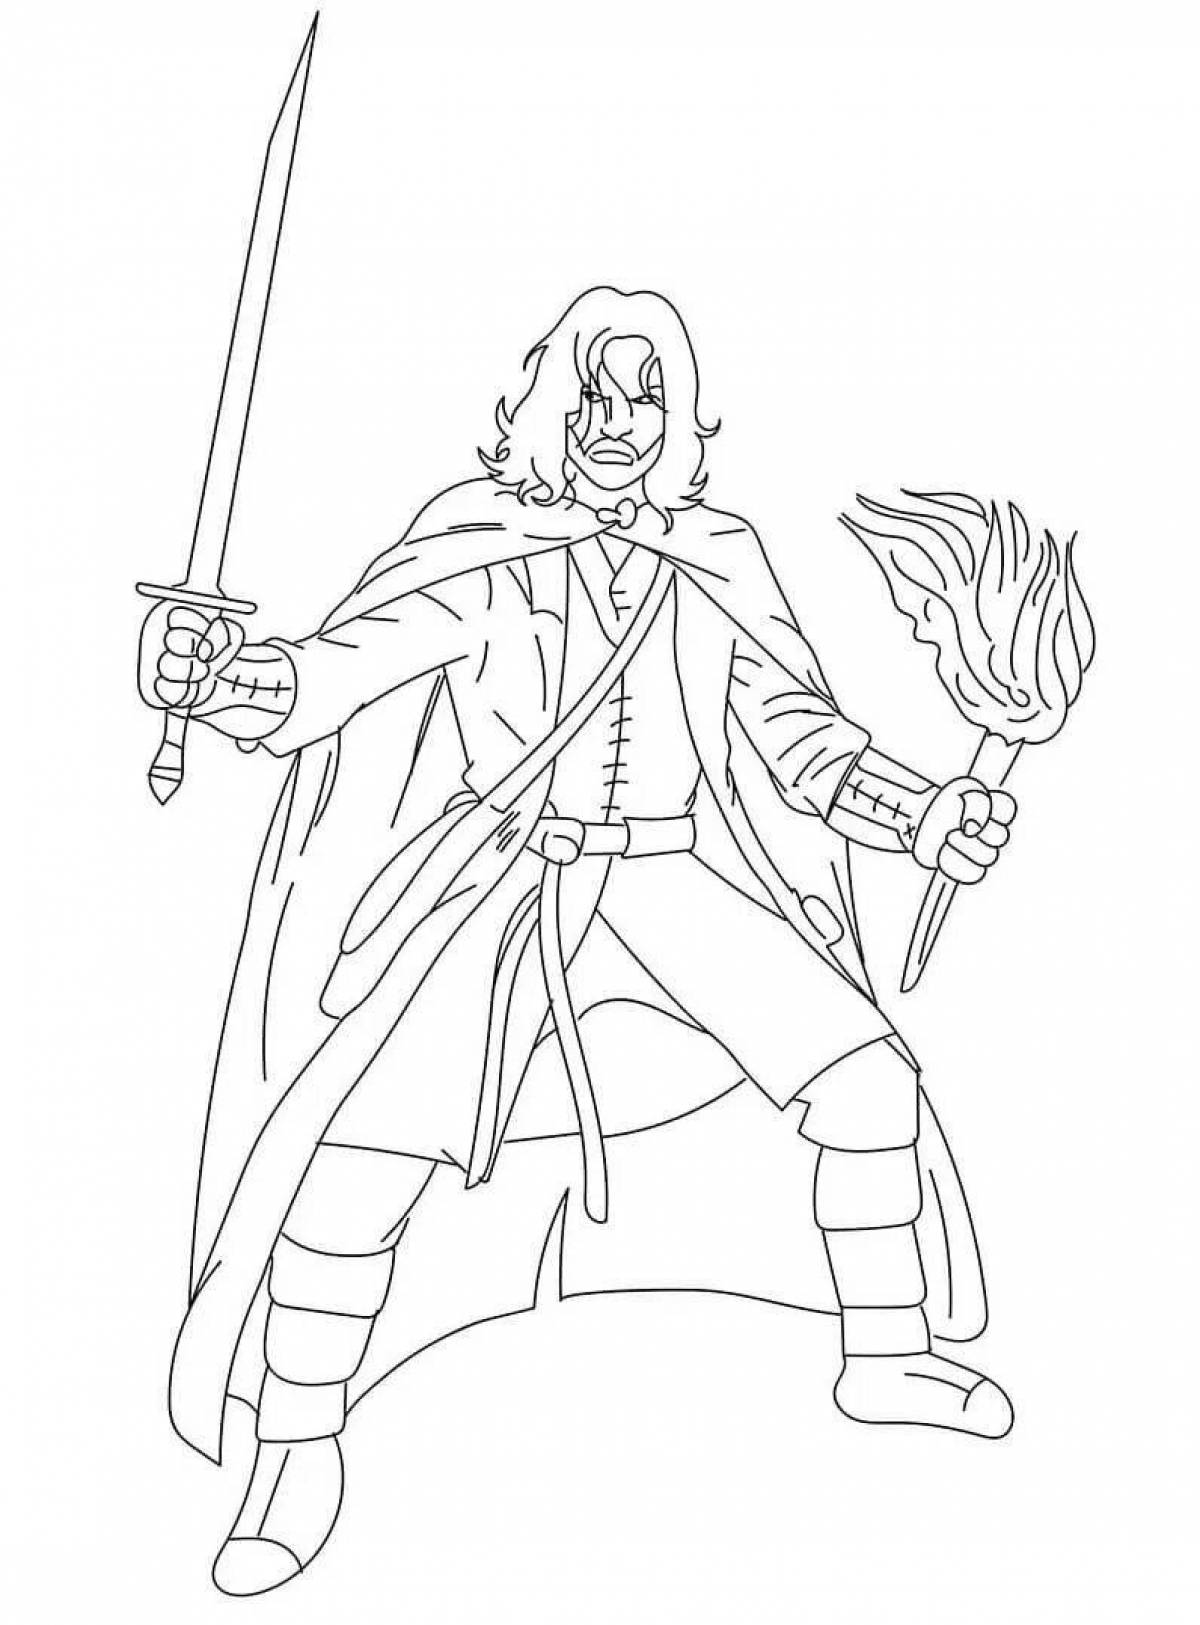 Lord of the Rings Glitter Coloring Page